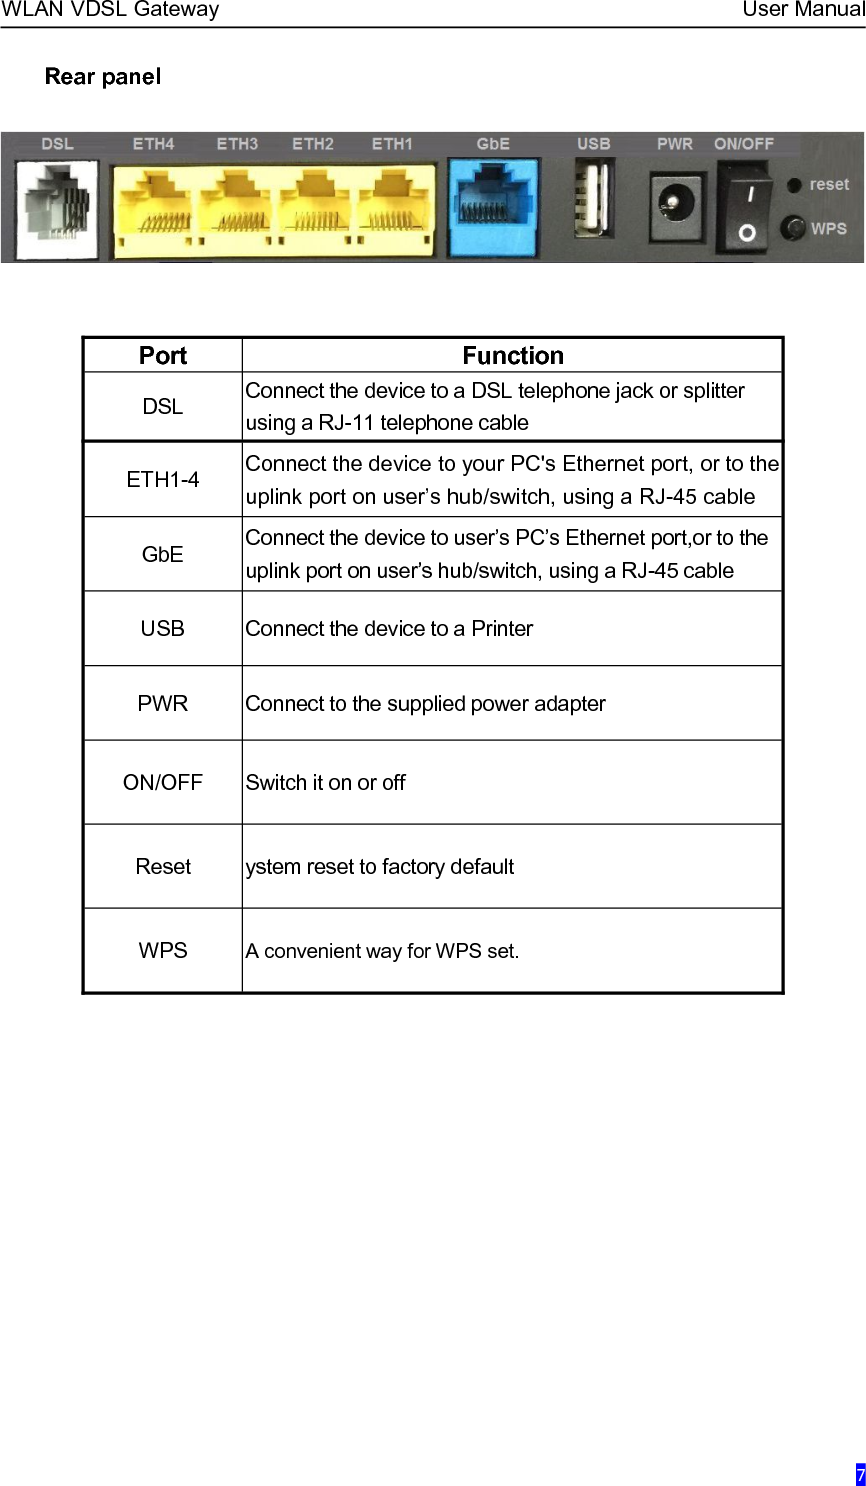 WLAN VDSL Gateway User Manual7Rear panelPortFunctionDSLConnect the device to a DSL telephone jack or splitterusing a RJ-11 telephone cableETH1-4Connect the device to your PC&apos;s Ethernet port, or to theuplink port on user’s hub/switch, using a RJ-45 cableGbEConnect the device to user’s PC’s Ethernet port,or to theuplink port on user’s hub/switch, using a RJ-45 cableUSBConnect the device to a PrinterPWRConnect to the supplied power adapterON/OFFSwitch it on or offResetystem reset to factory defaultWPSA convenient way for WPS set.